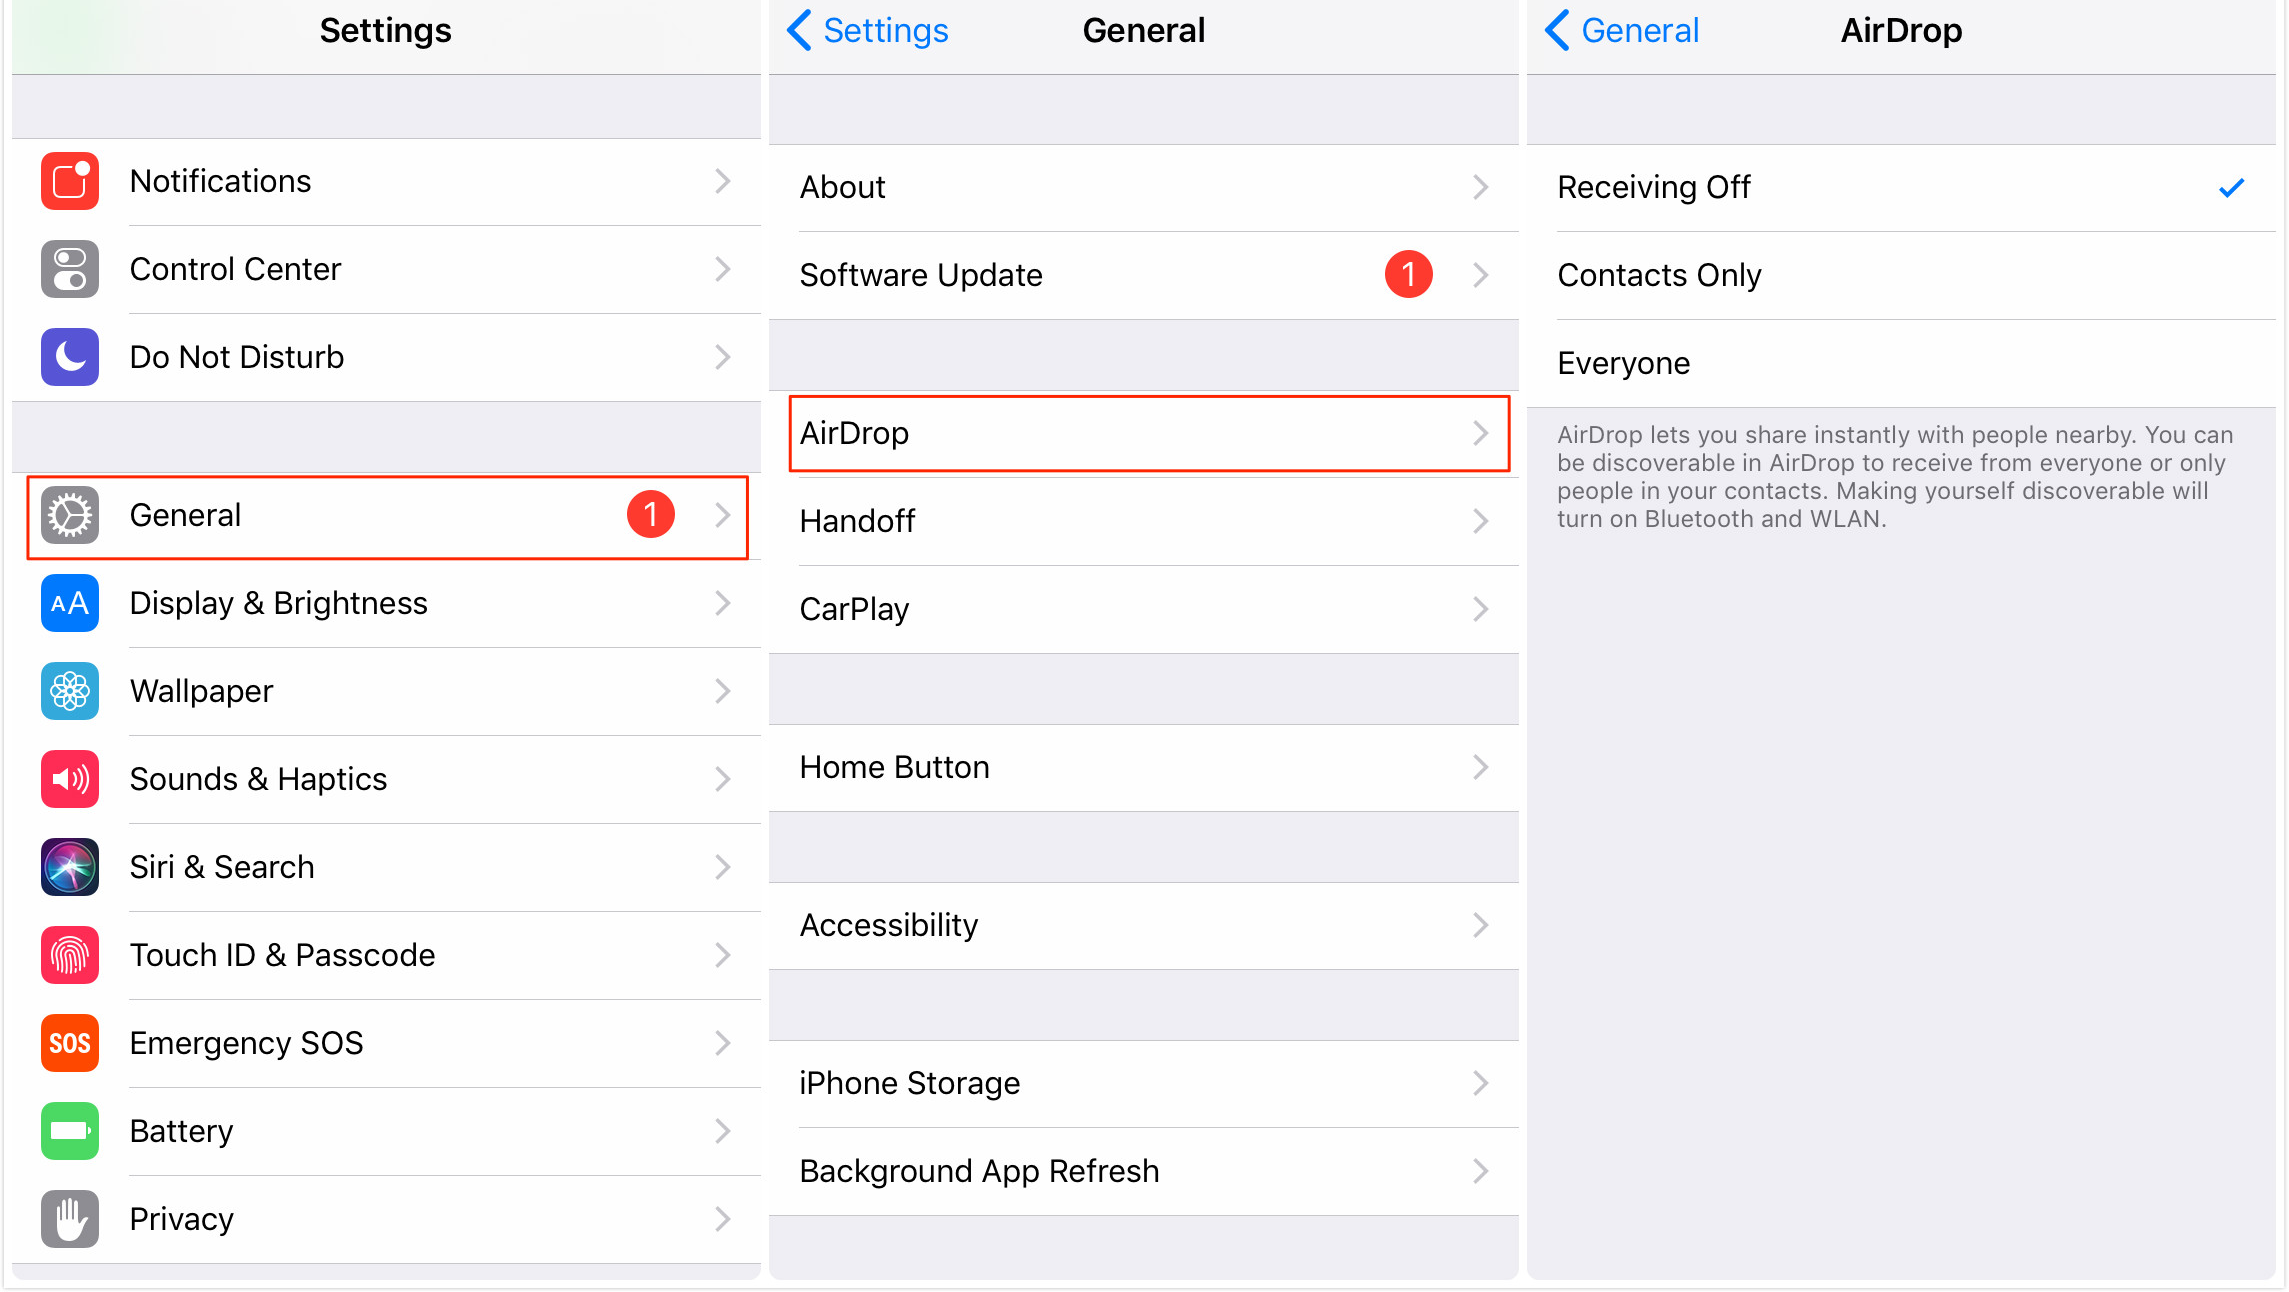 How to Enable AirDrop from Settings in iOS 11